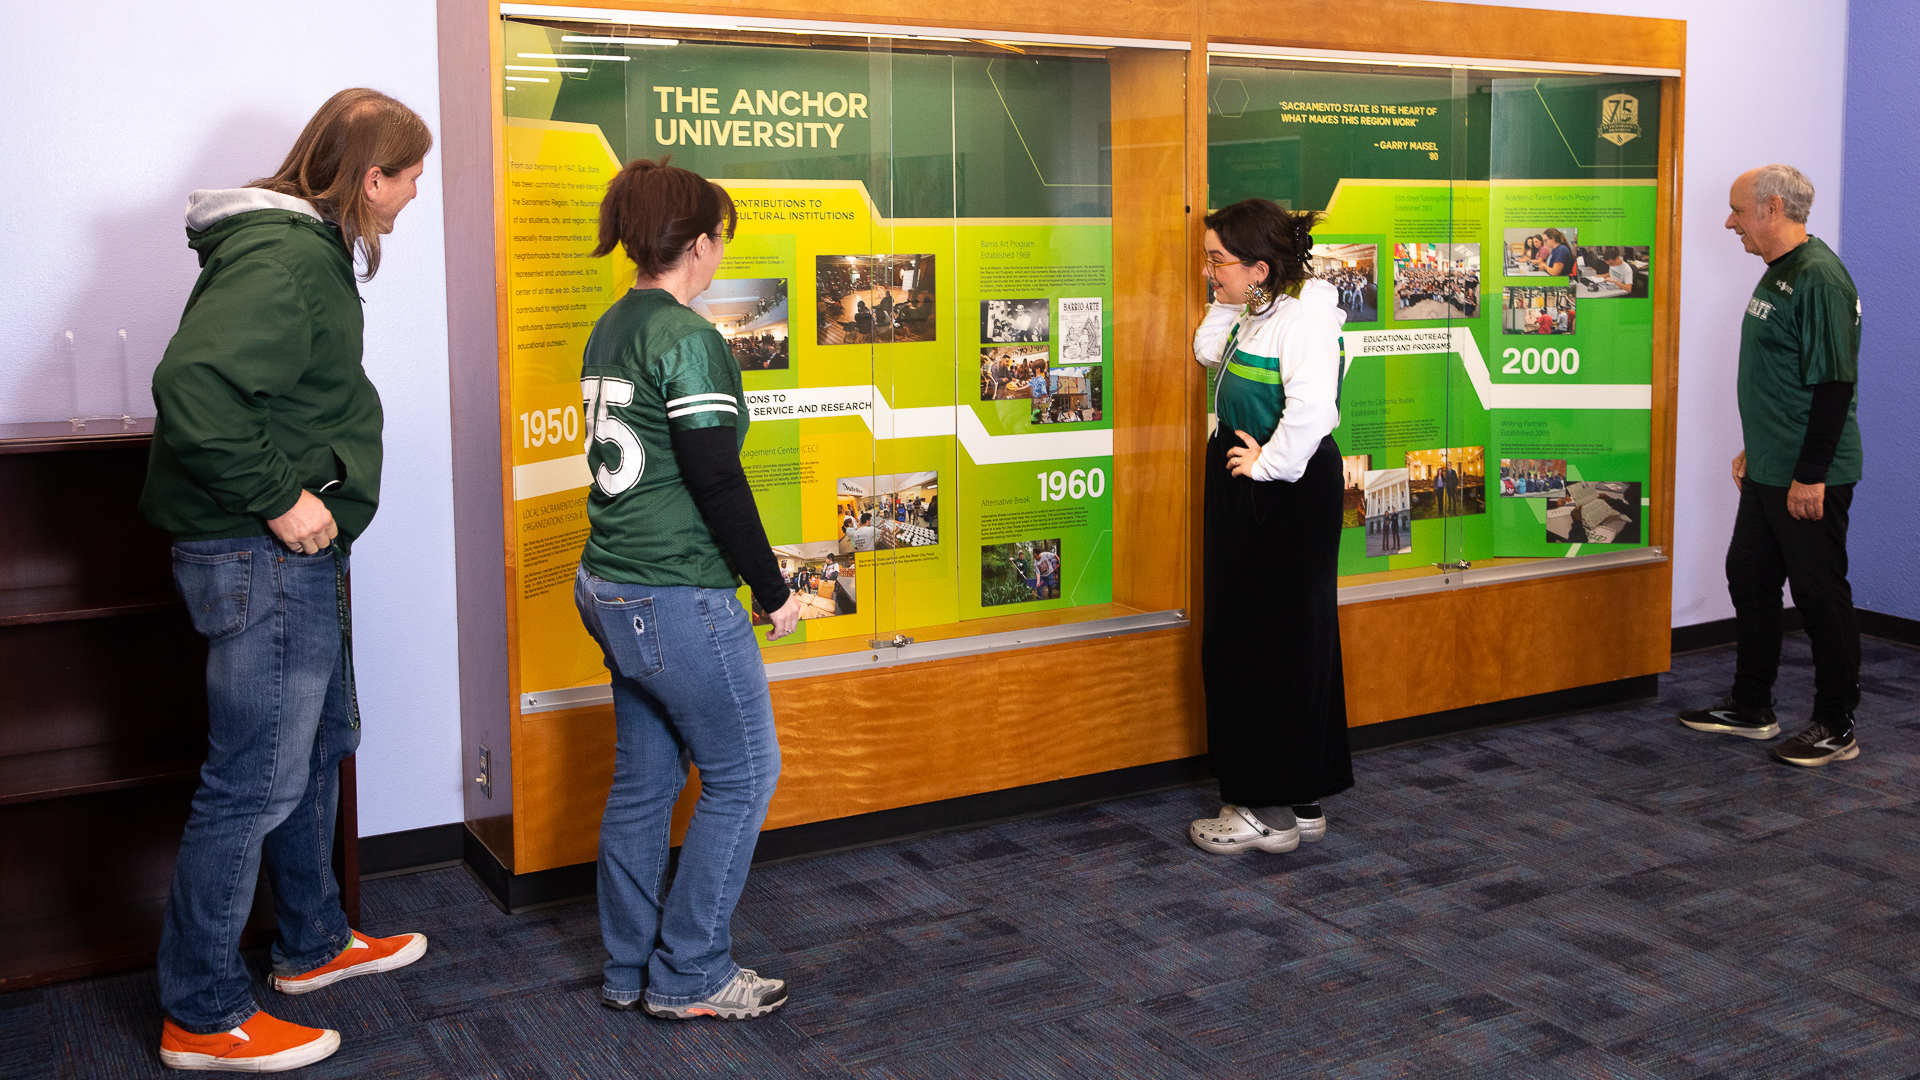 Members of the University Library and Archives staff observe the Sacramento State 75th Anniversary exhibit display put together by their team.